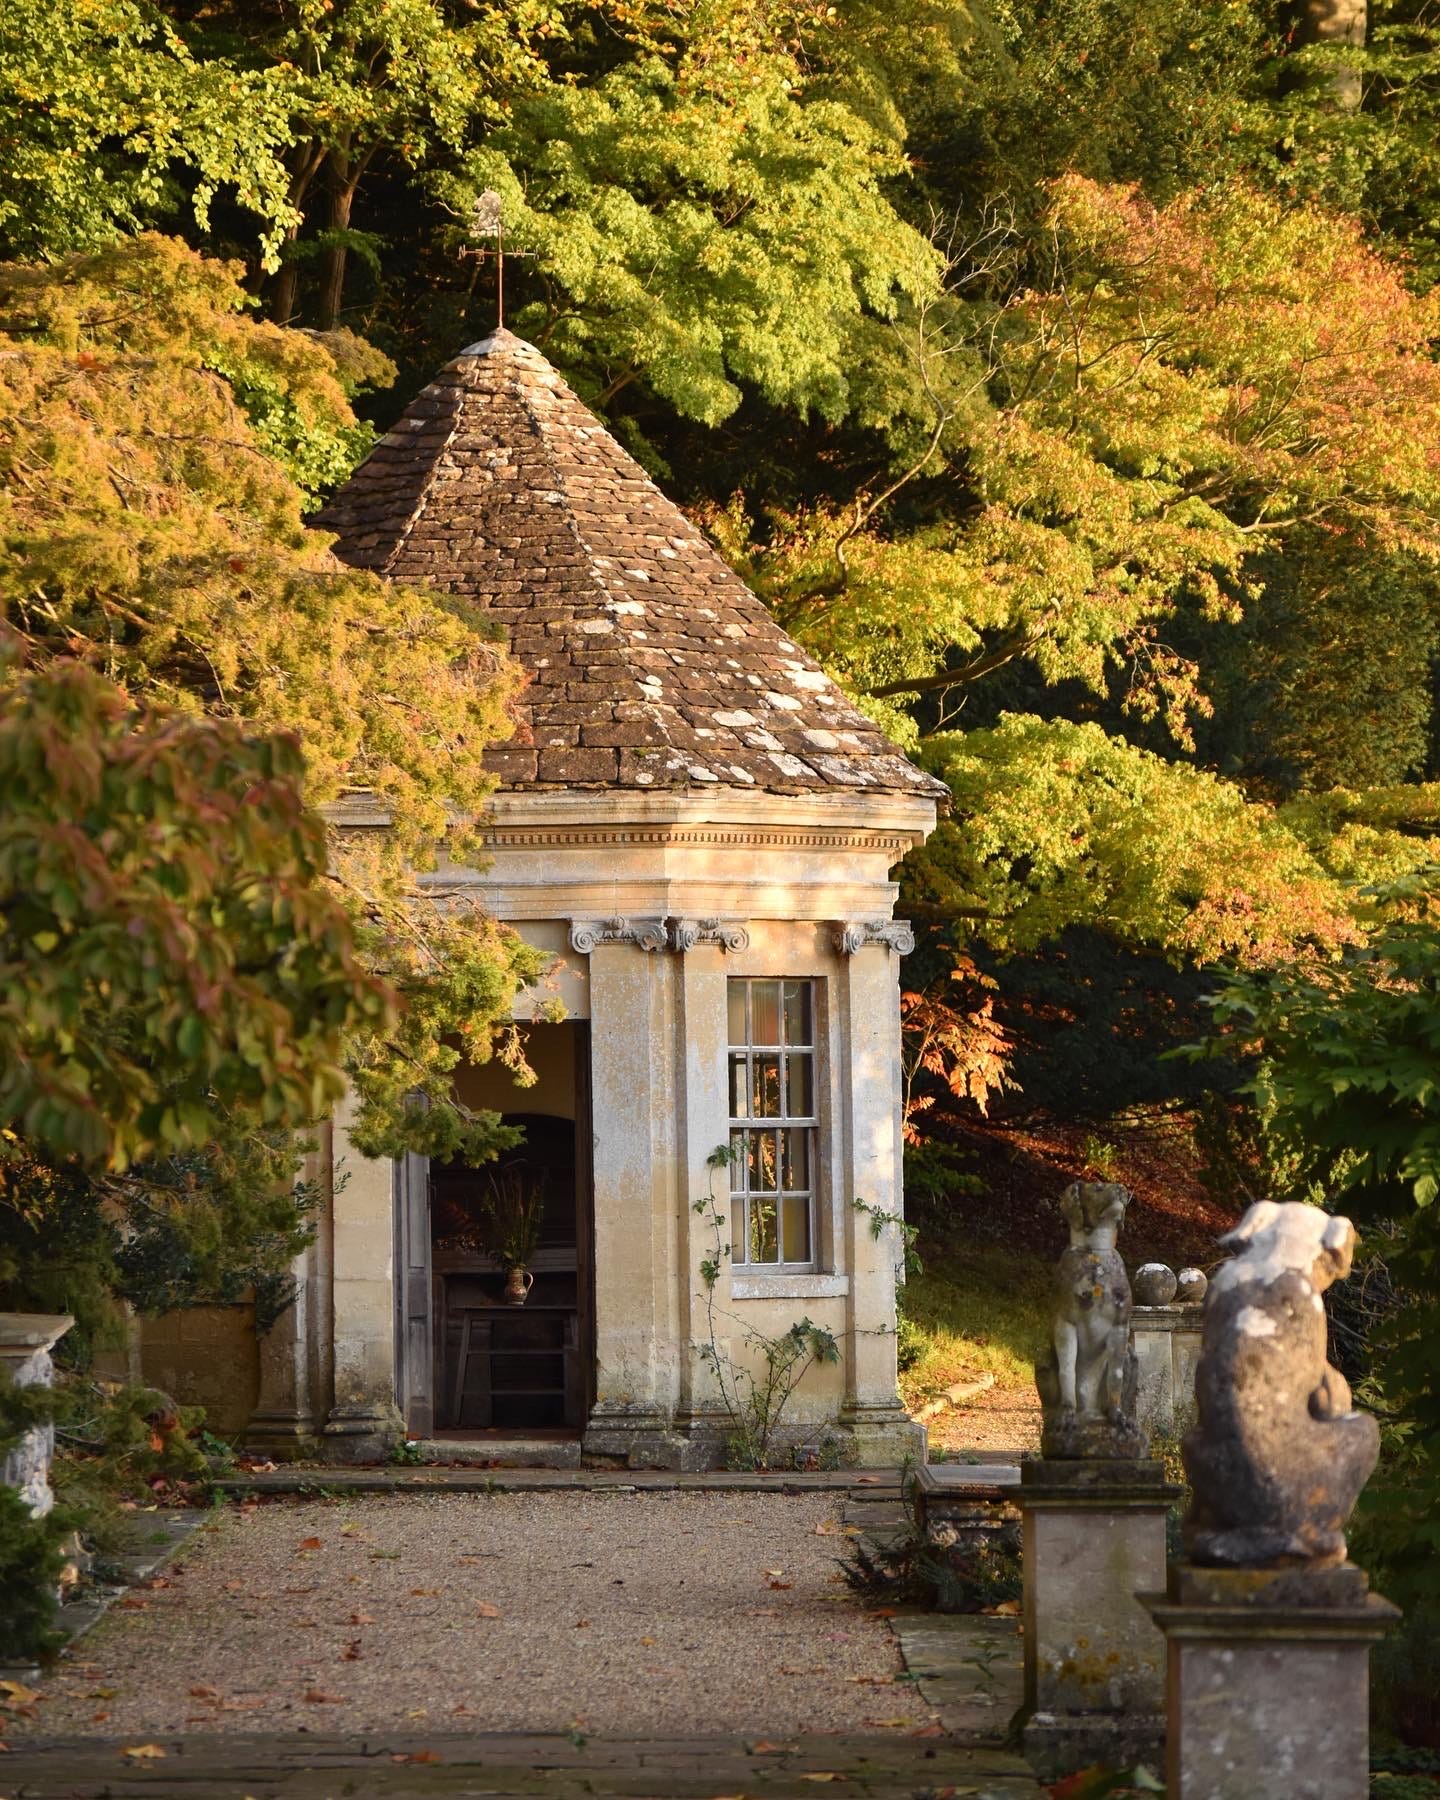 Gazebo at Iford Manor in autumn